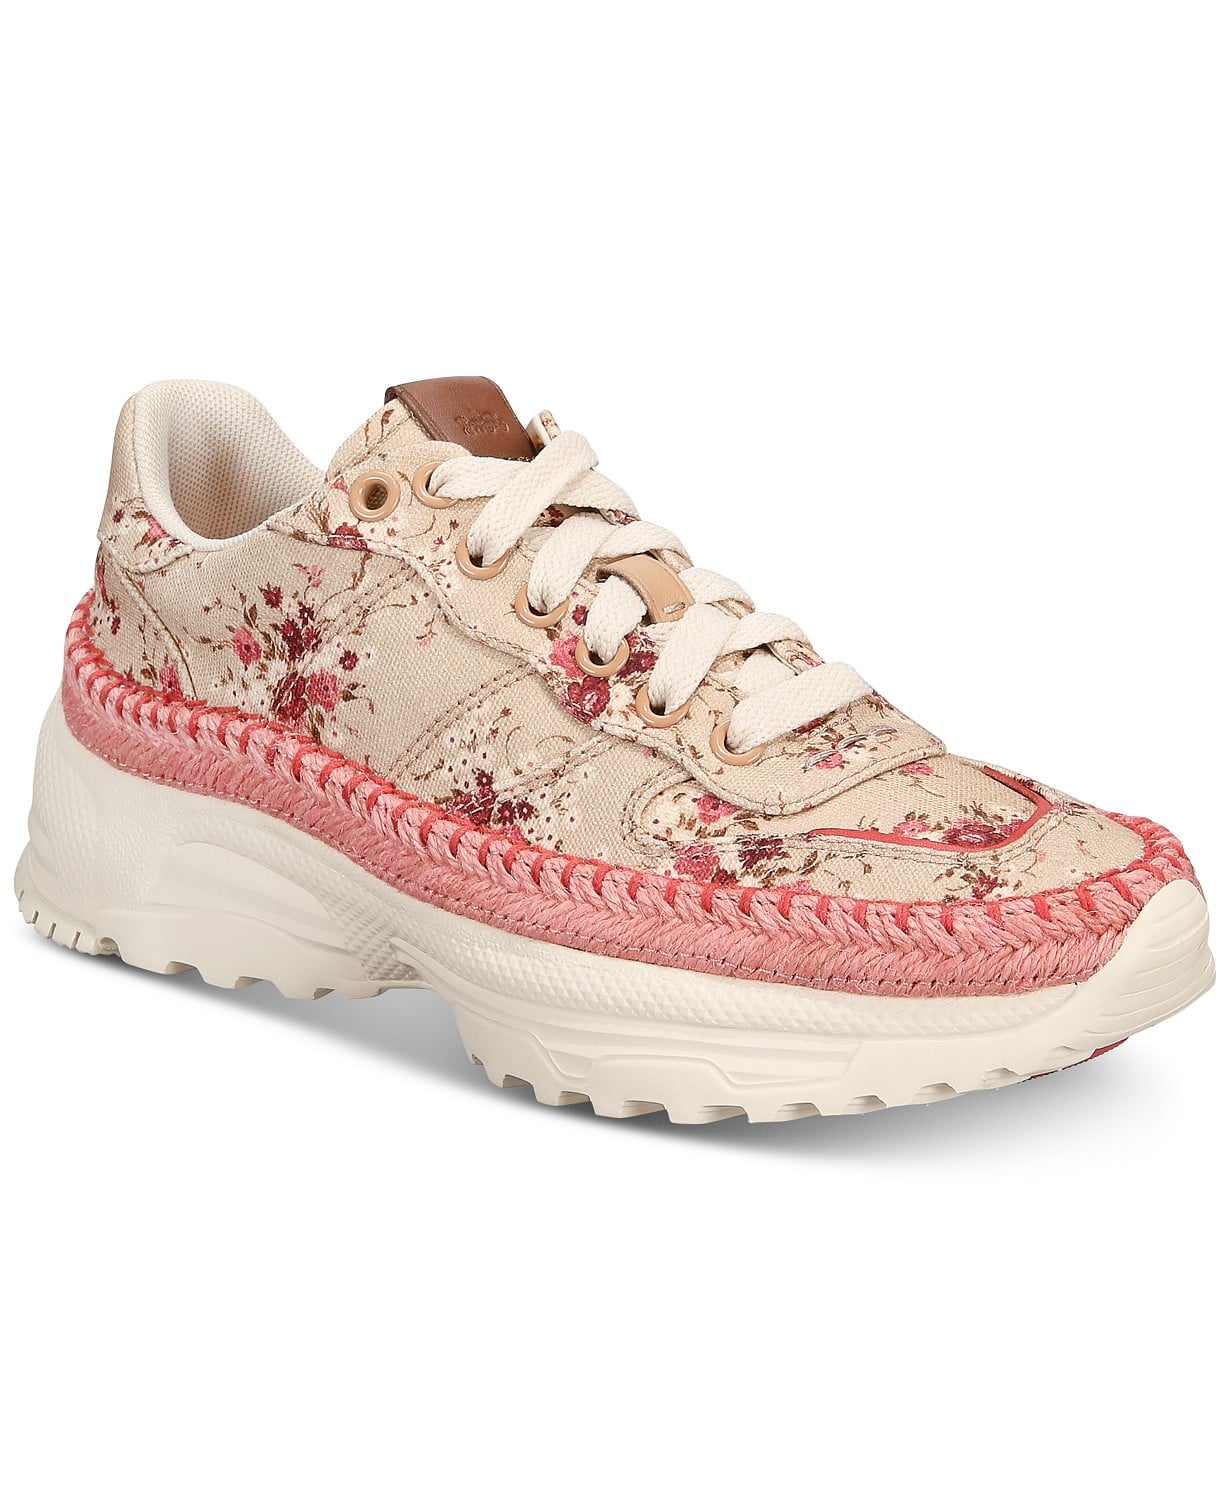 Coach Floral Runner Sneakers